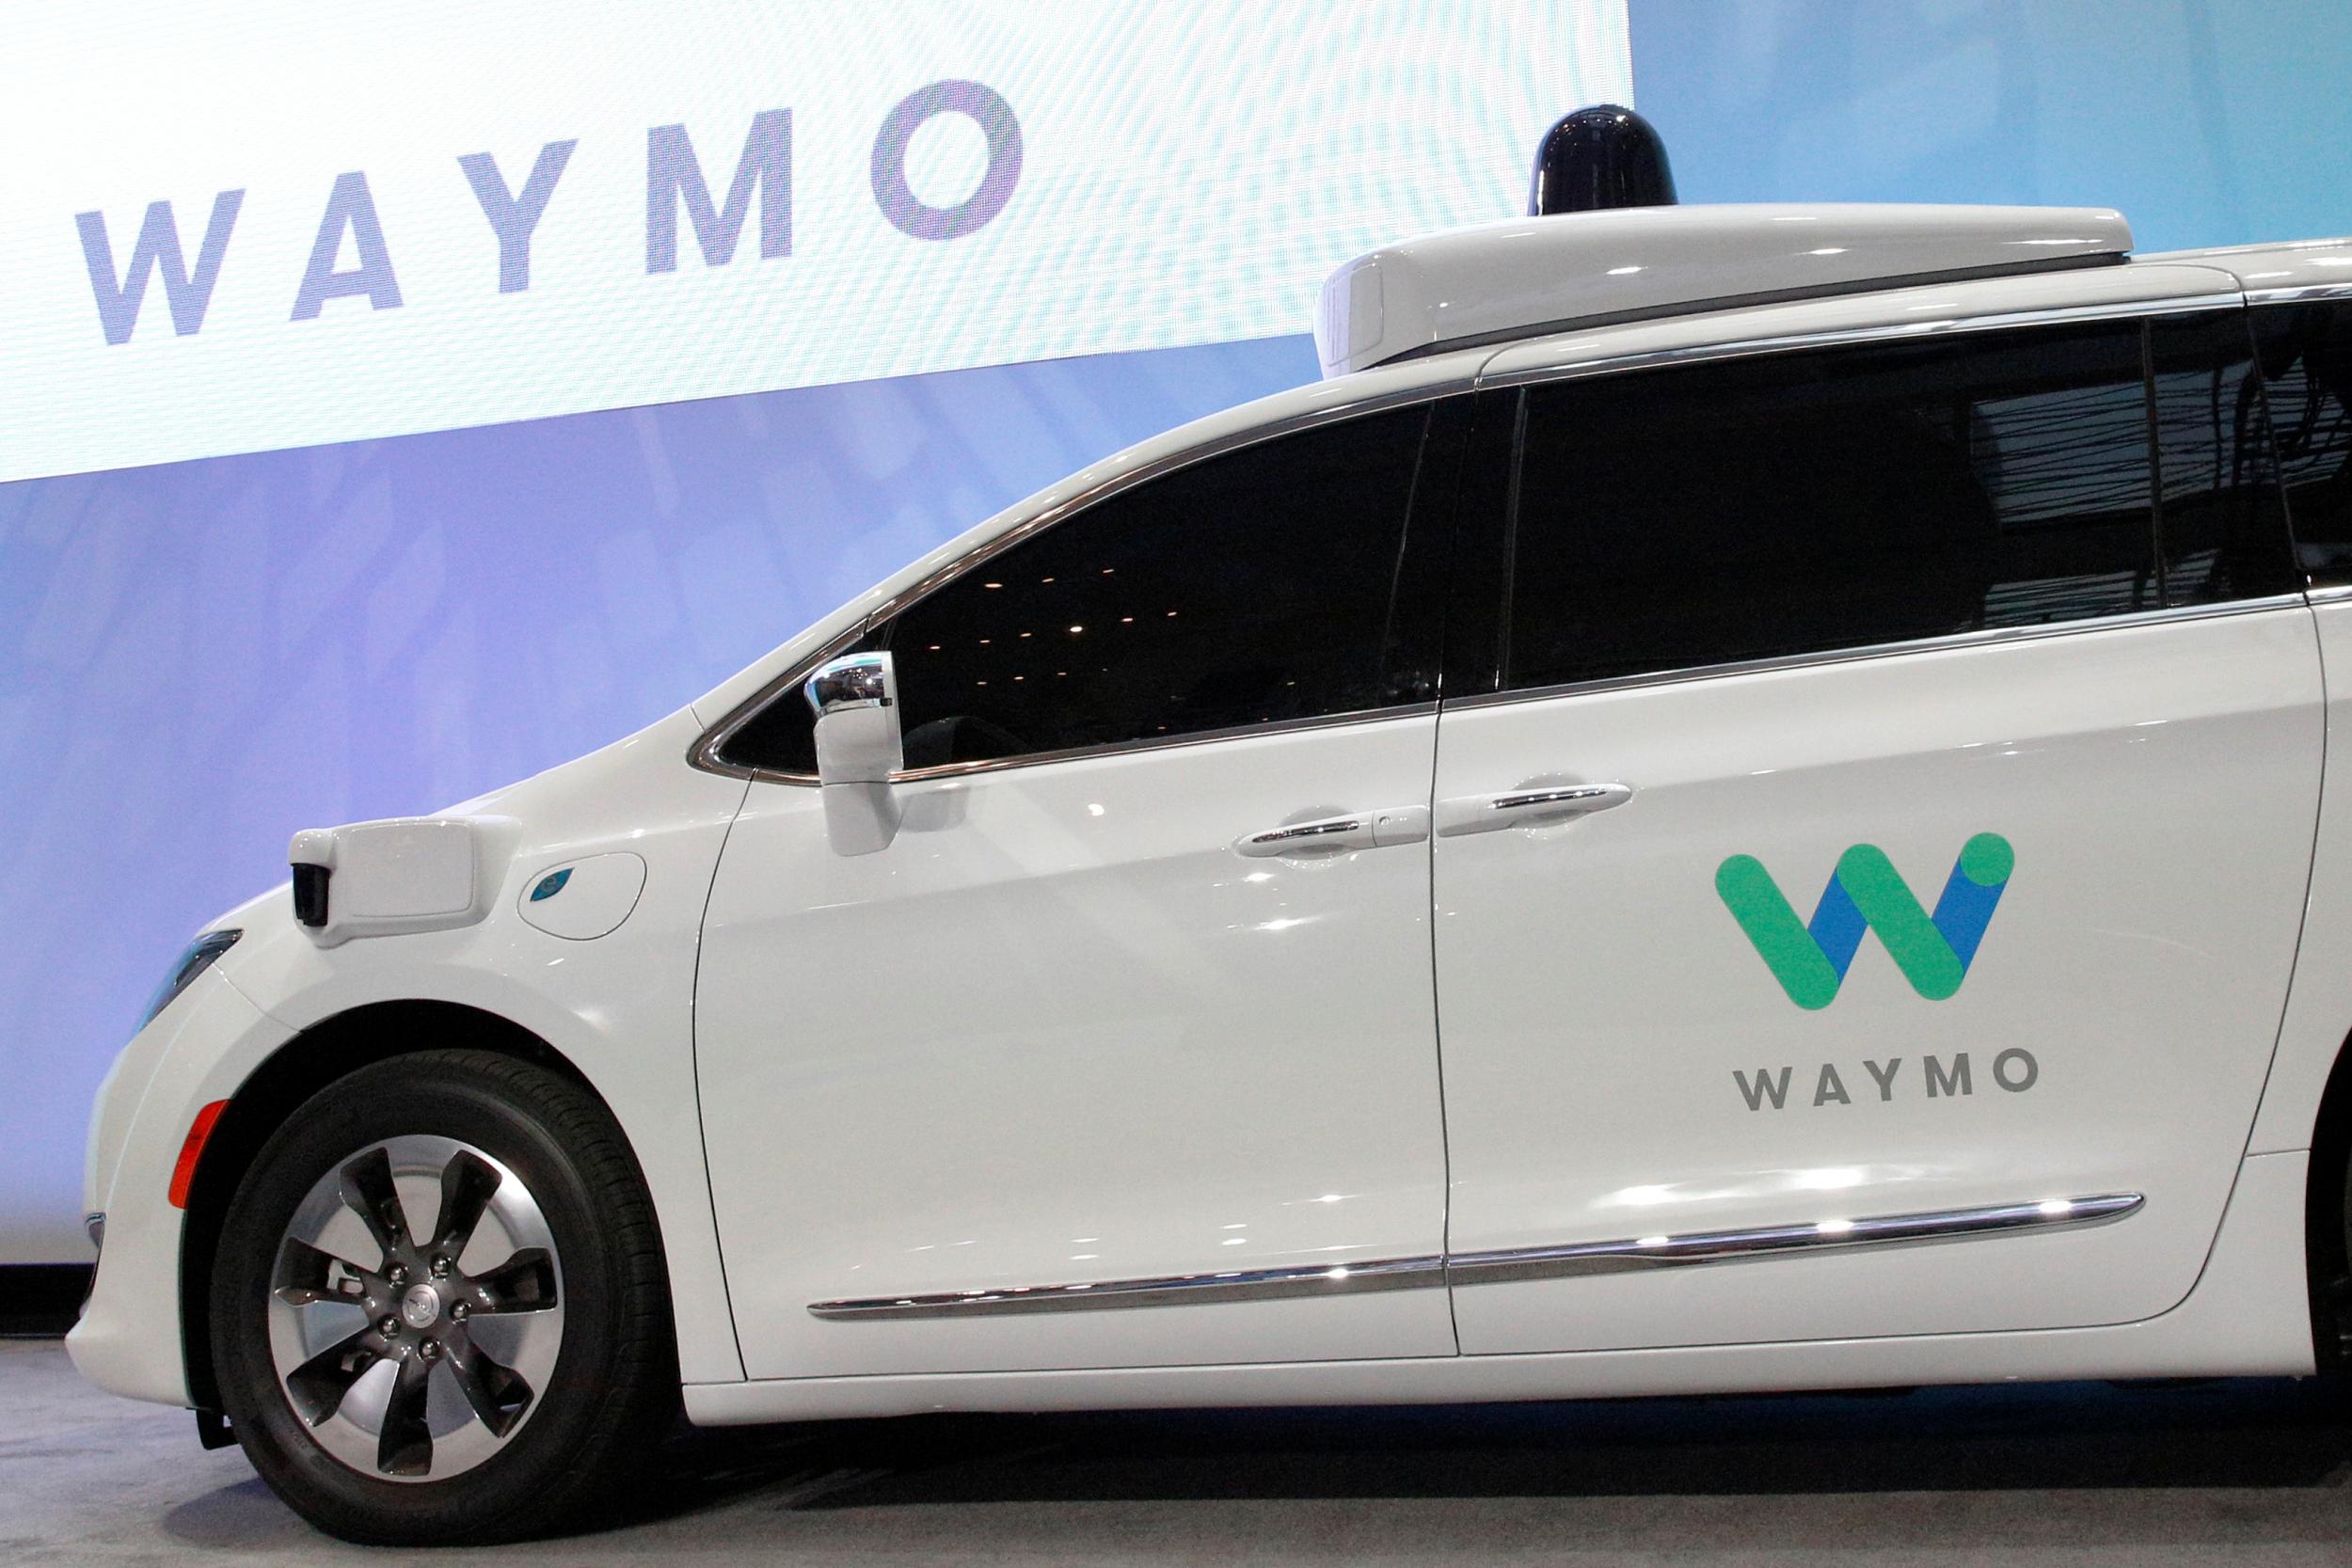 Waymo alleged that one of its senior engineers hatched a plan in 2015 with Uber for him to steal more than 14,000 files